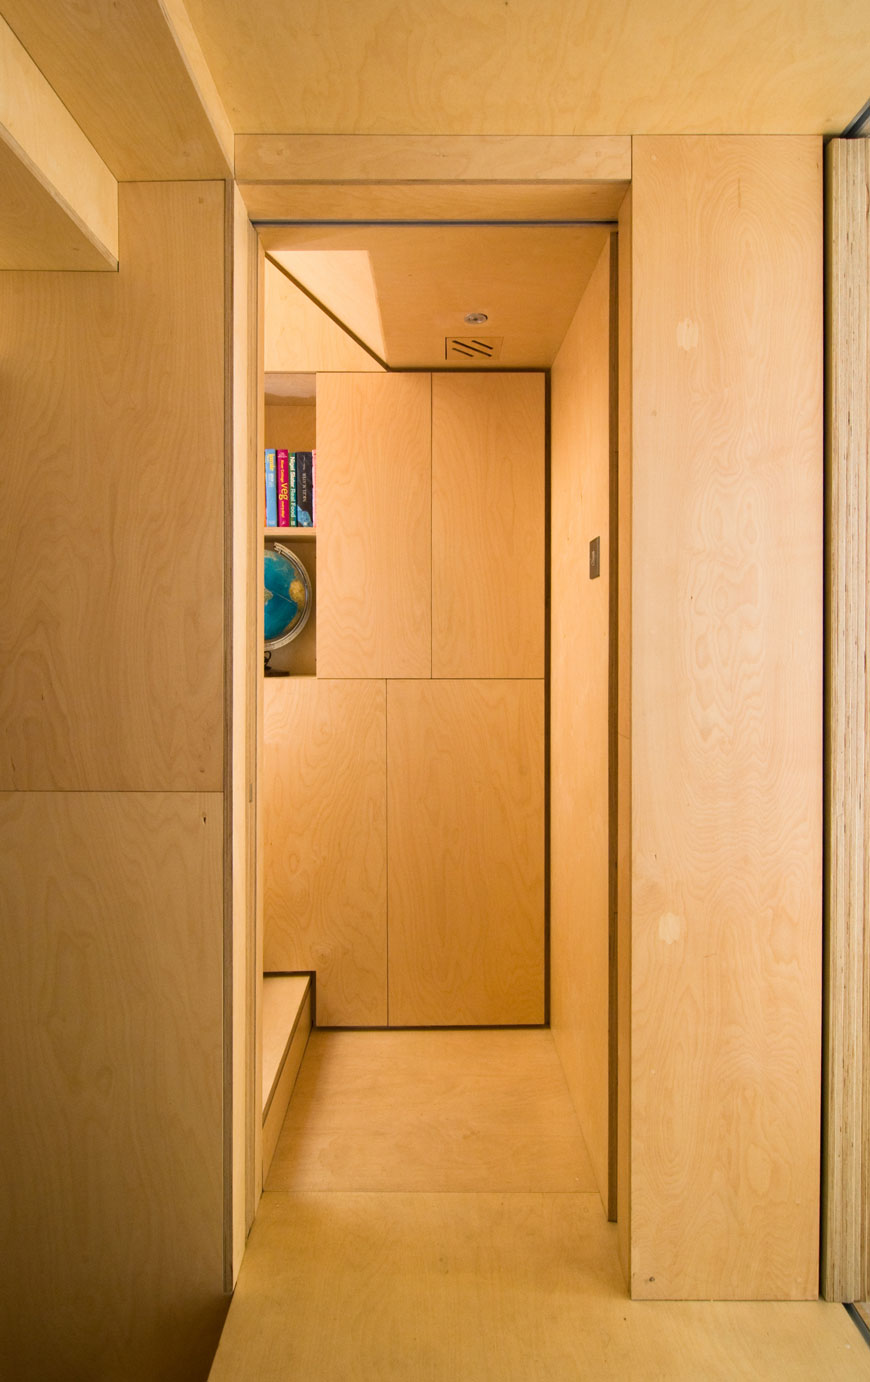 Plywood hidden storage units in the corridor of the Mews Property.